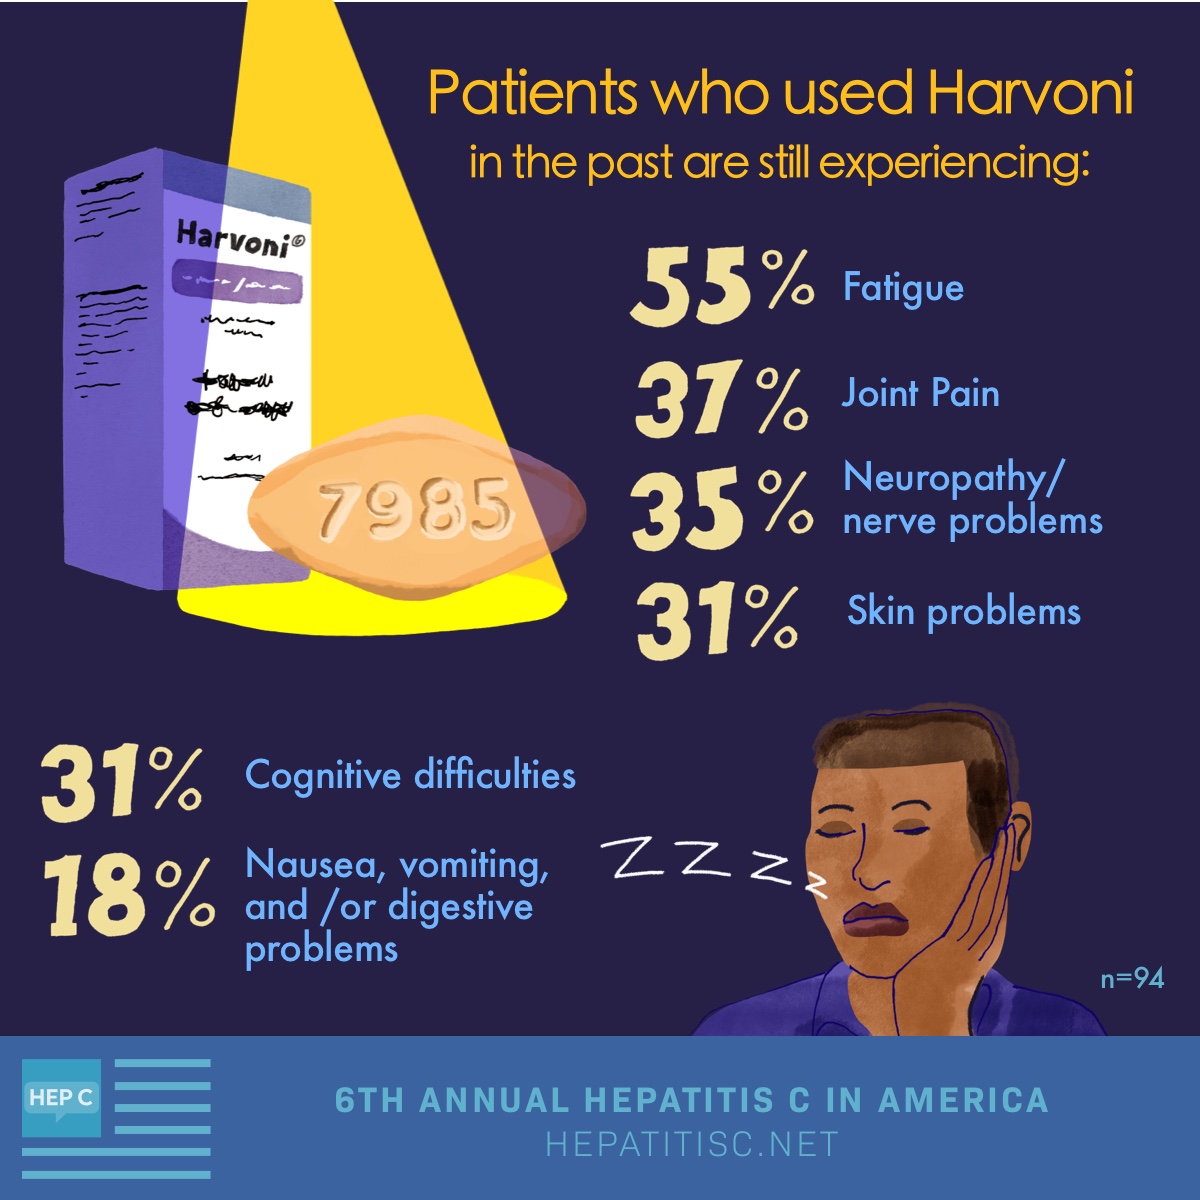 Patients who used Harvoni in the past are still experiencing: 55% fatigue, 37% joint pain, 35% neuropathy/nerve problems